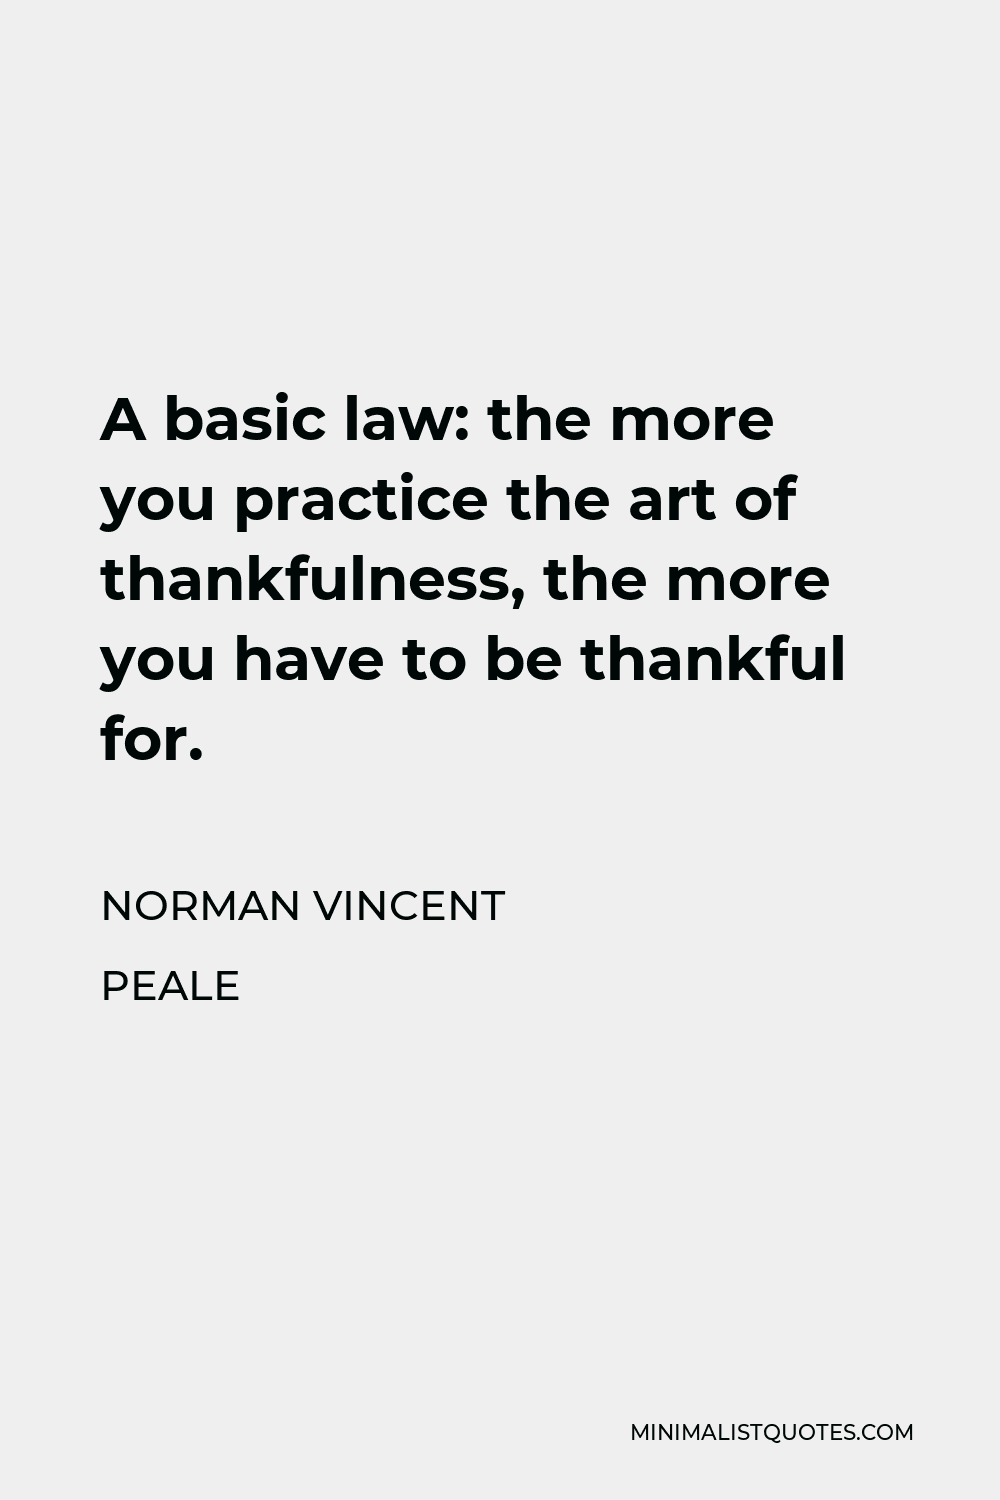 Norman Vincent Peale Quote - A basic law: the more you practice the art of thankfulness, the more you have to be thankful for.